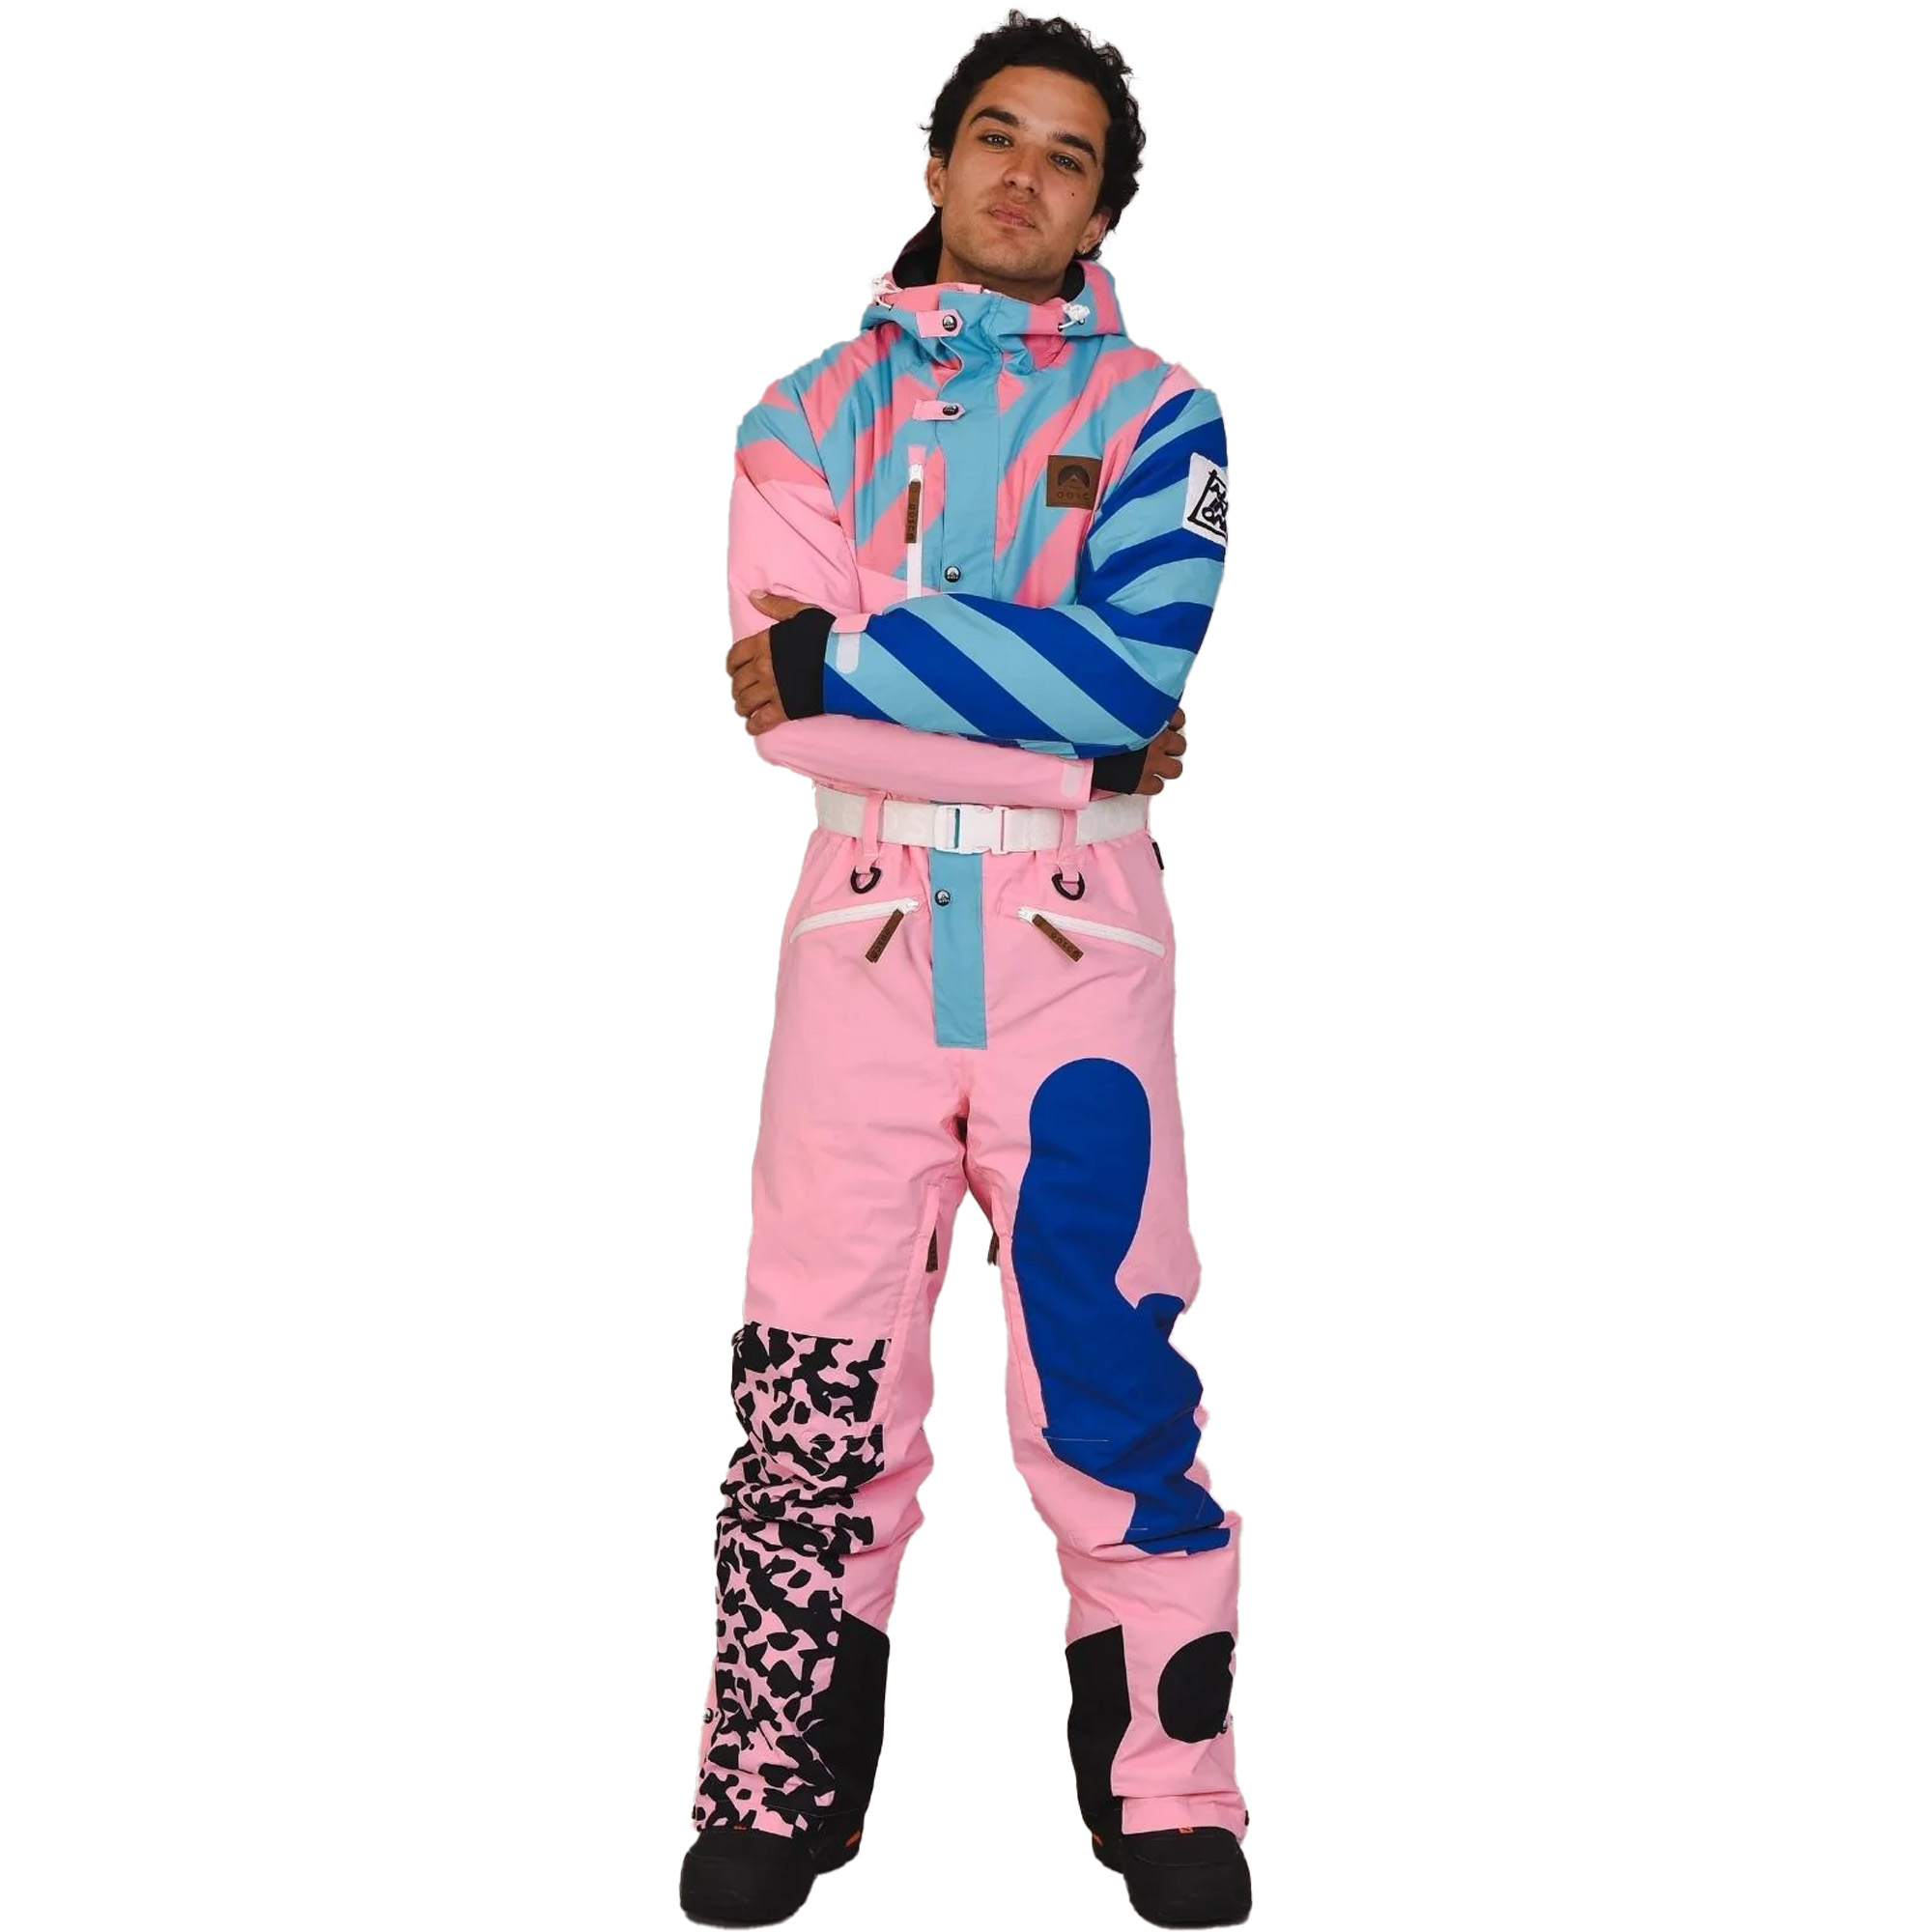 OOSC Penfold In Pink Unisex One Piece Ski Suit